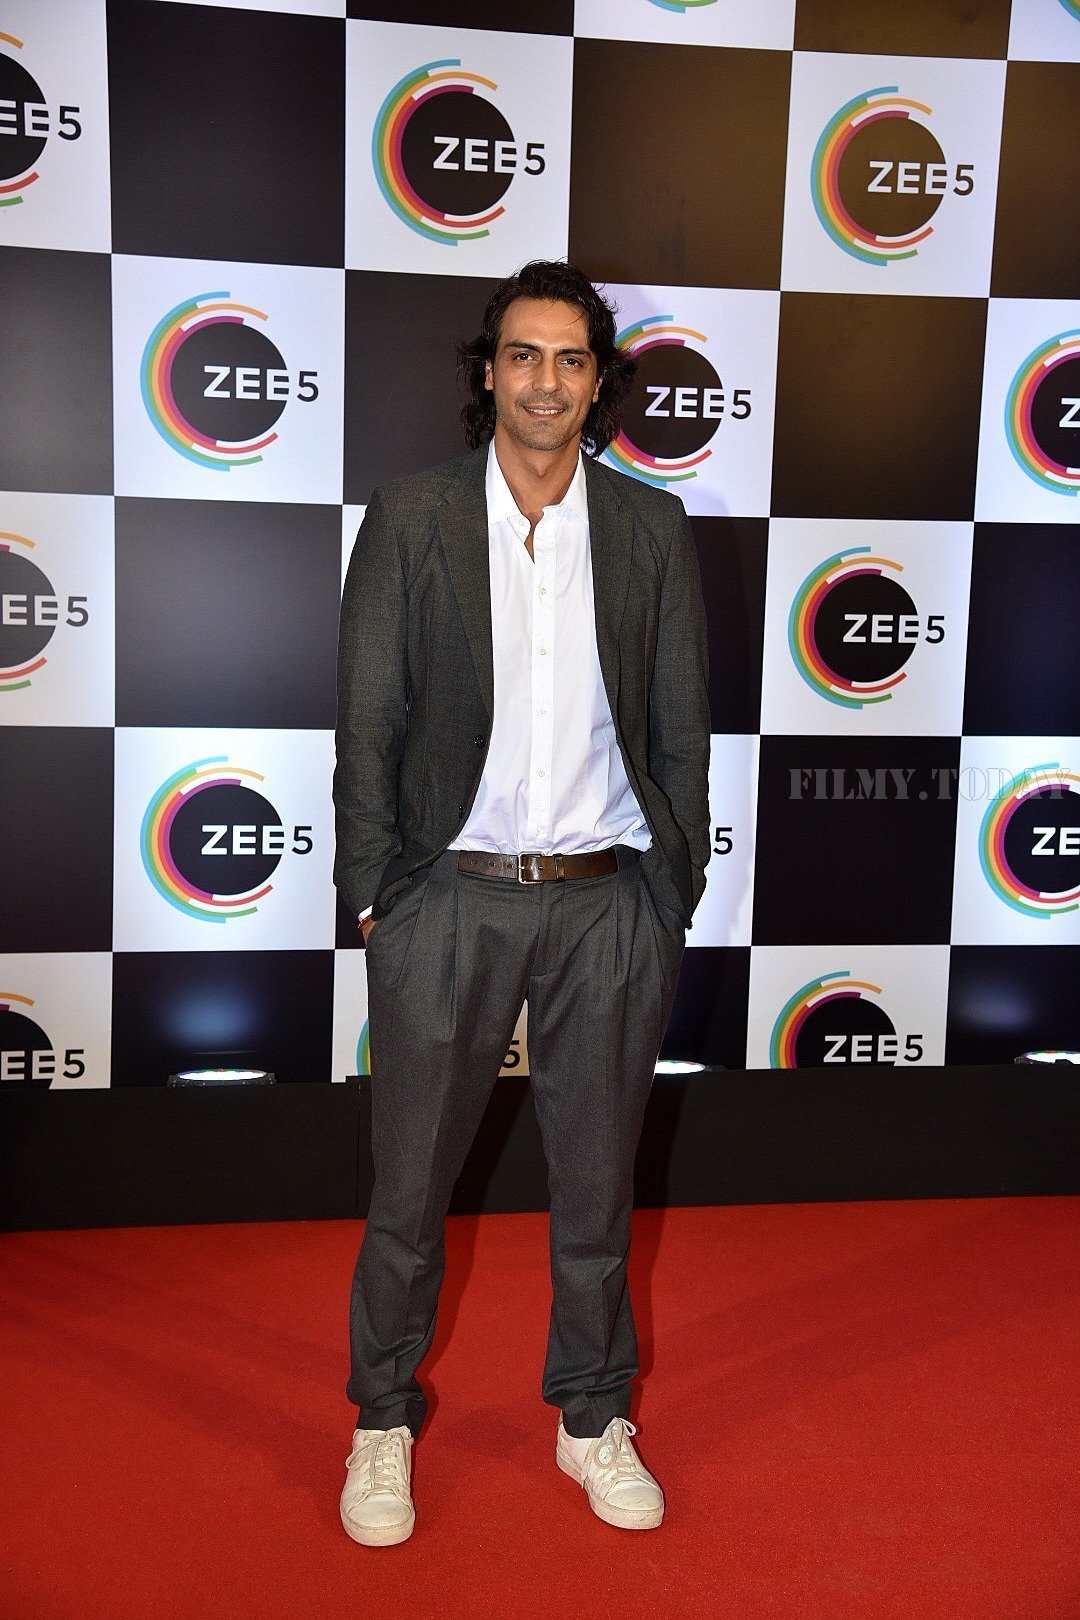 Arjun Rampal - Photos: Red Carpet Of 1 Year Anniversary Of Zee5 App | Picture 1627474